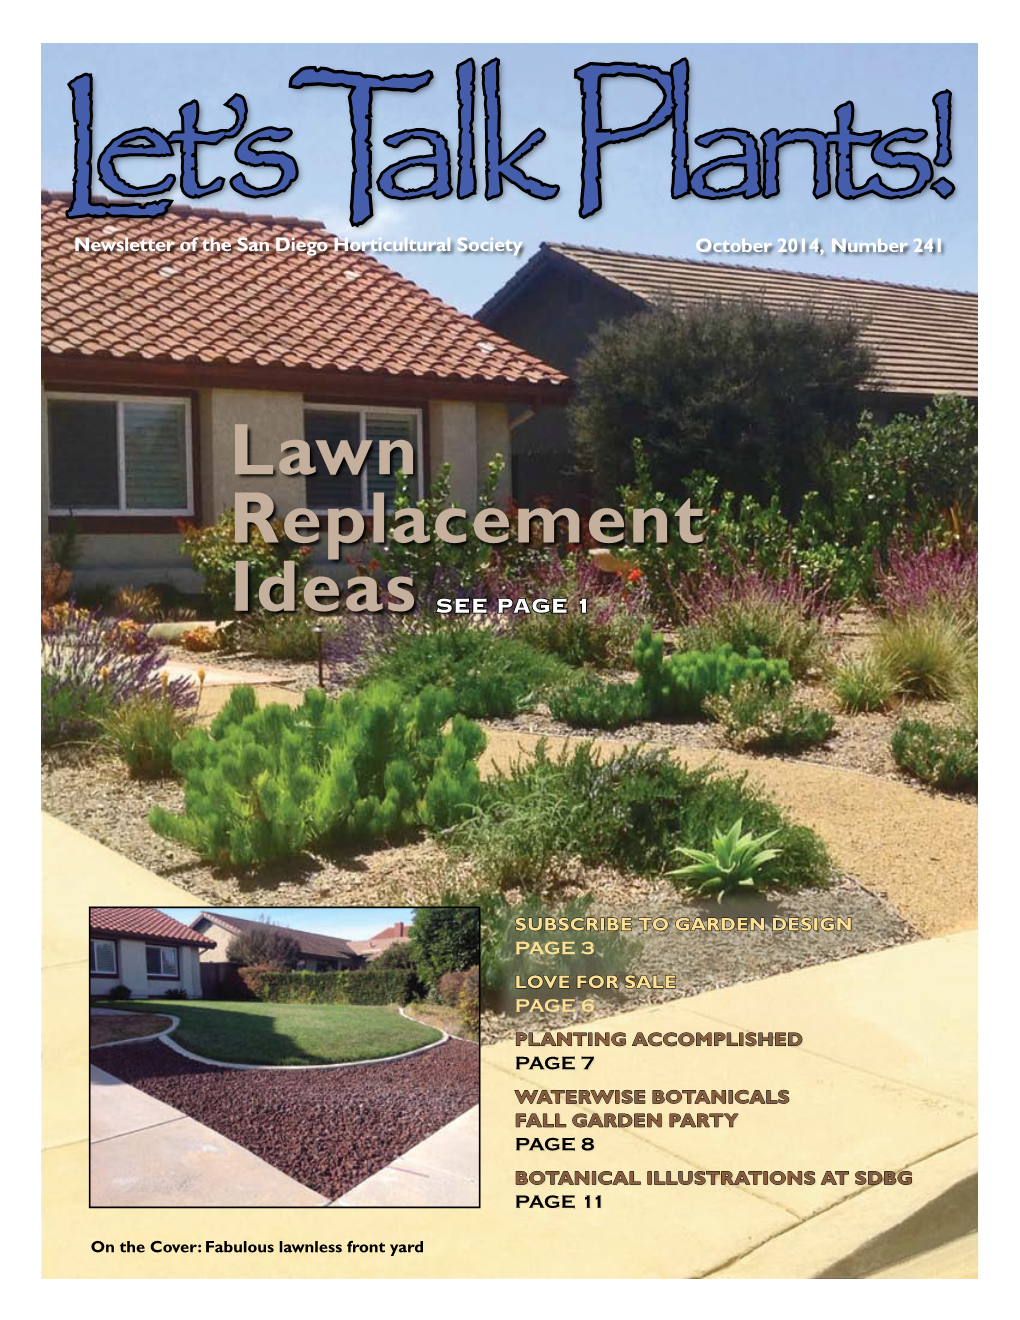 Lawn Replacement Ideas See Page 1